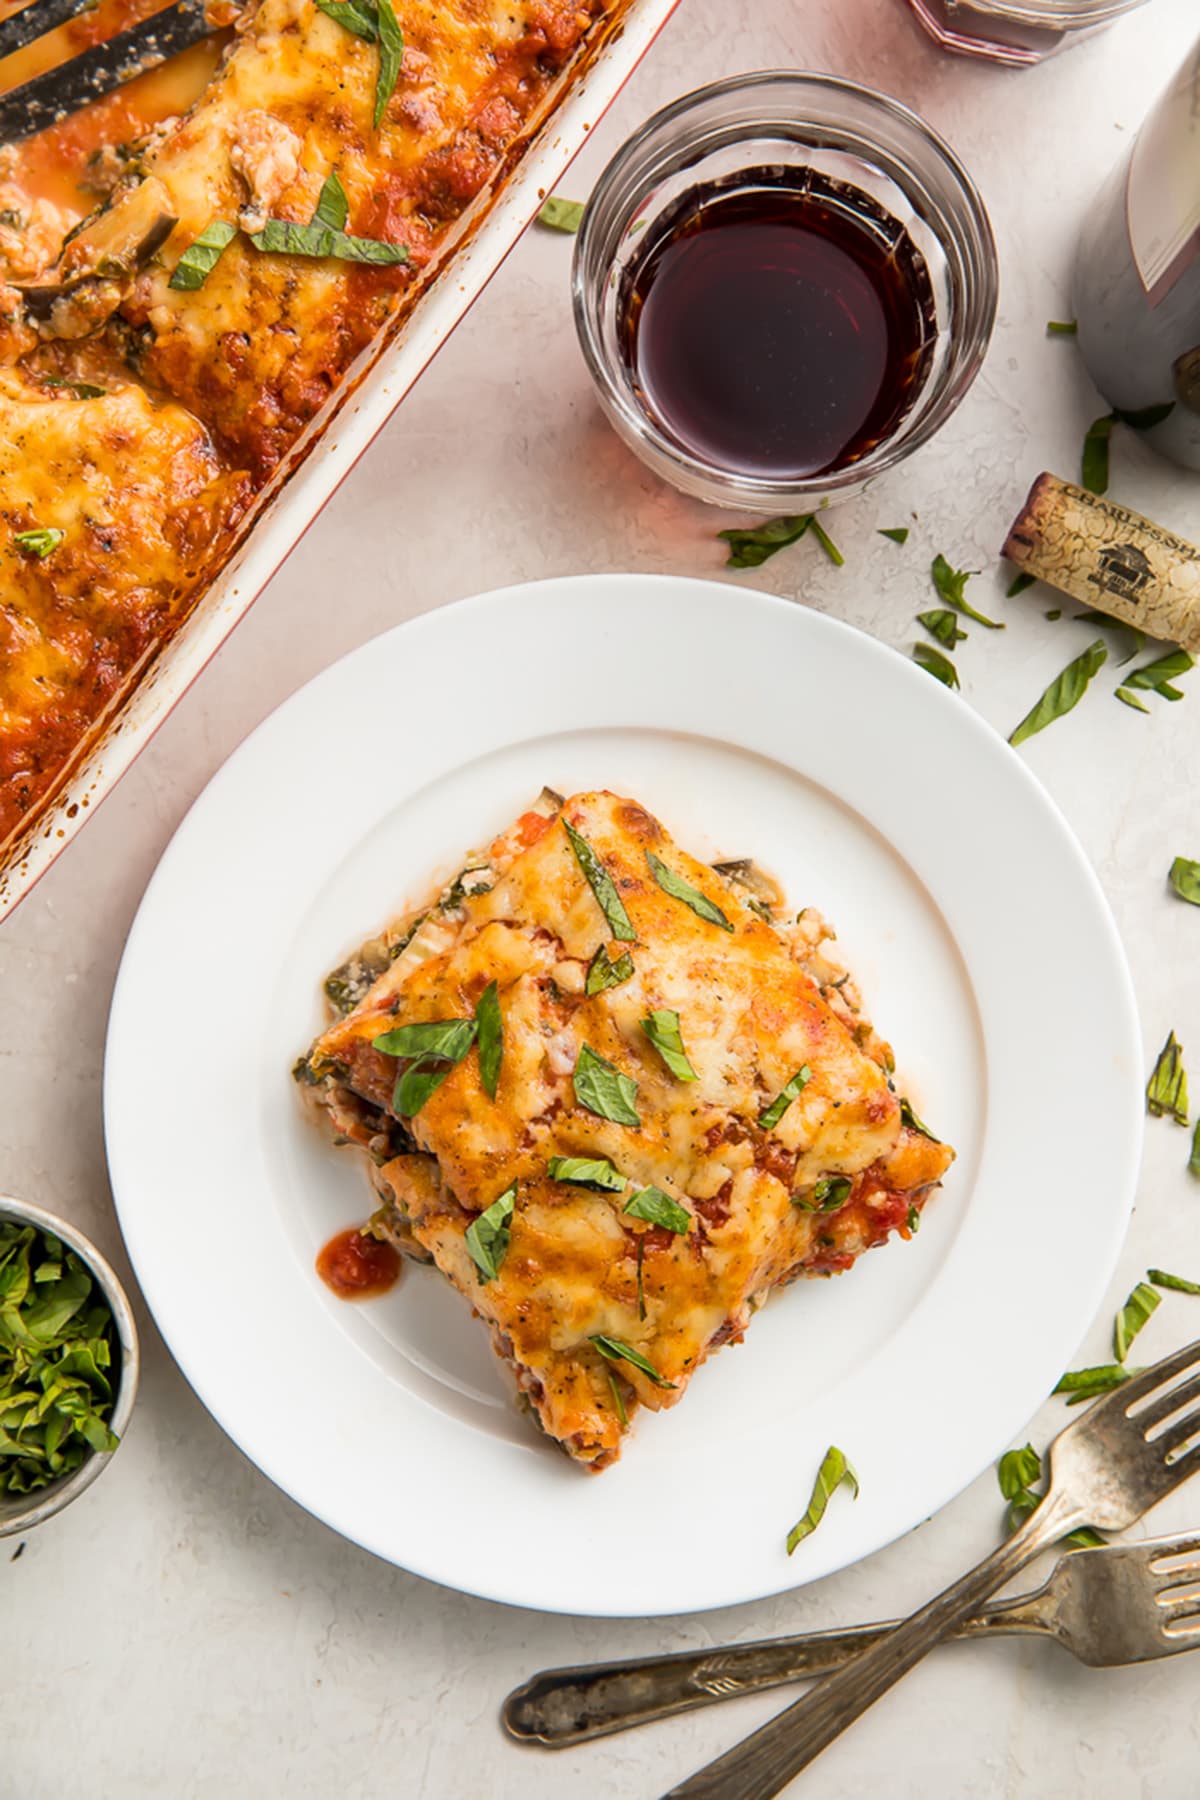 A square of eggplant lasagna on a white plate next to a casserole dish of eggplant lasagna.